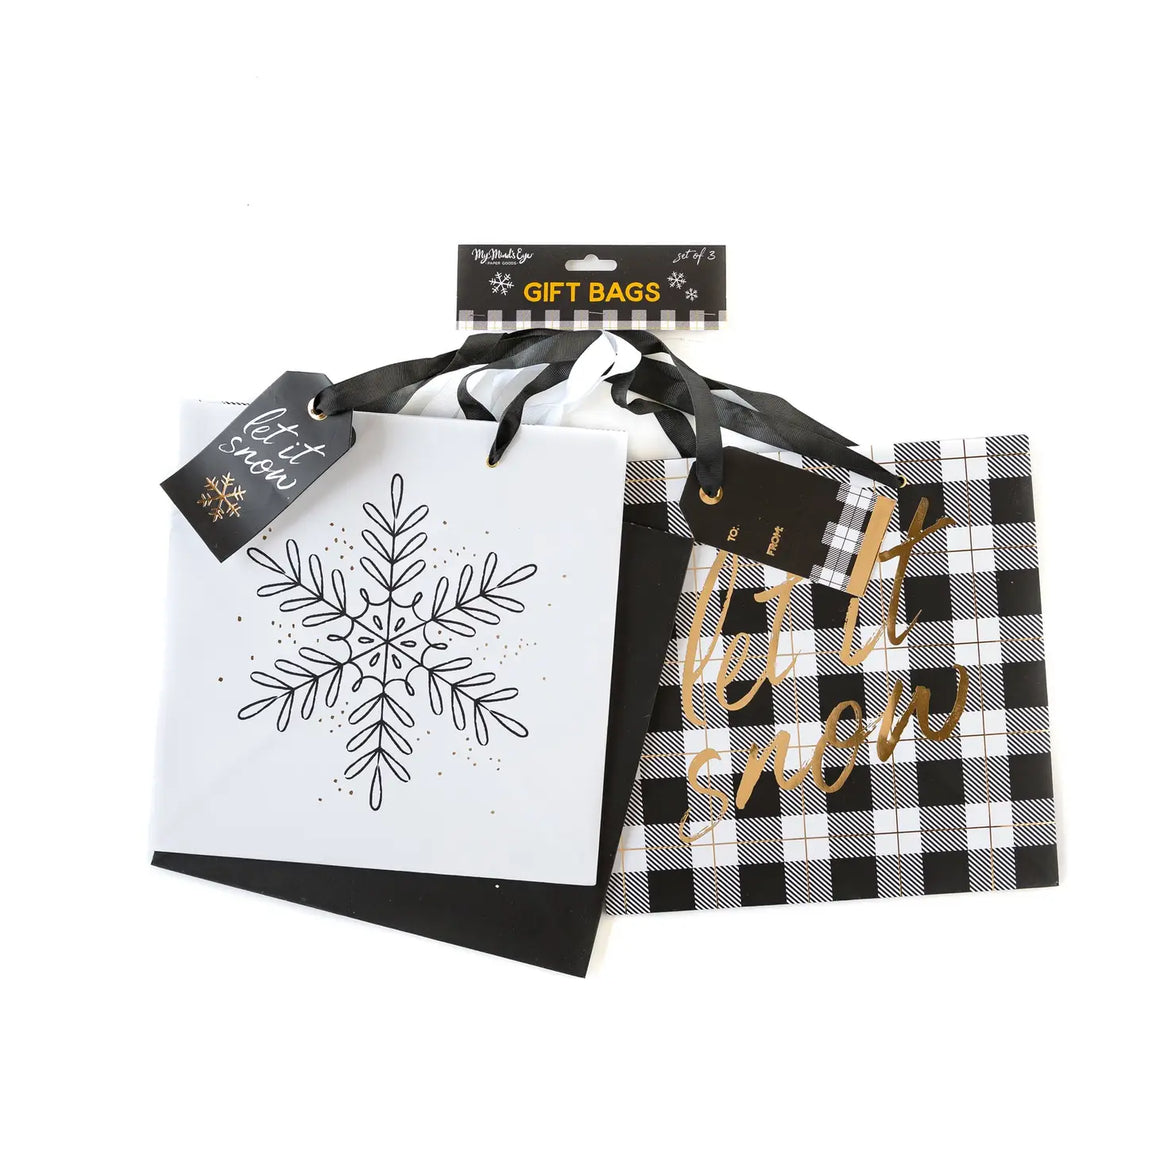 GIFT BAGS WITH TAGS - HOLIDAY SNOWFLAKES